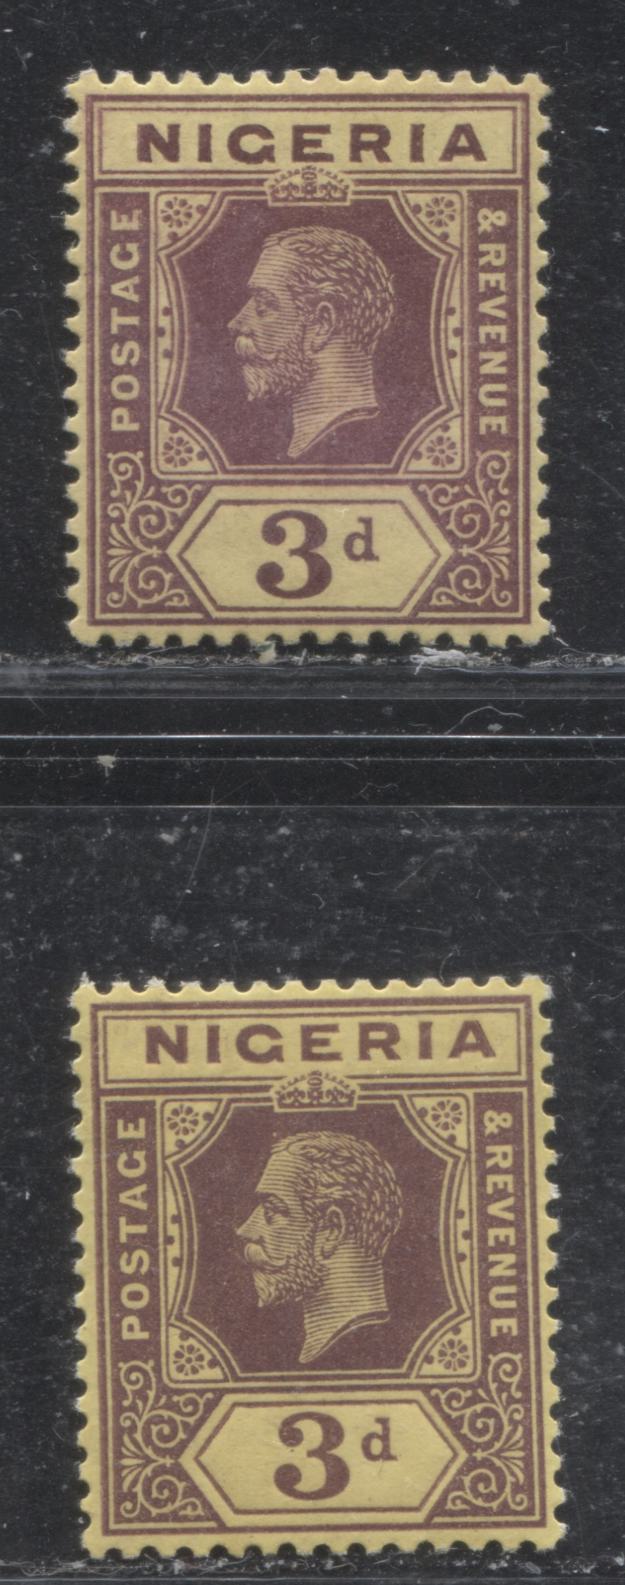 Lot 190 Nigeria SG# 5d 3d Chocolate and Purple Brown on Yellow Paper With Buff Back King George V, 1914-1921 Multiple Crown CA Imperium Keyplate Issue, Two VFOG Examples, From Different Printings, Each a Slightly Different Shade